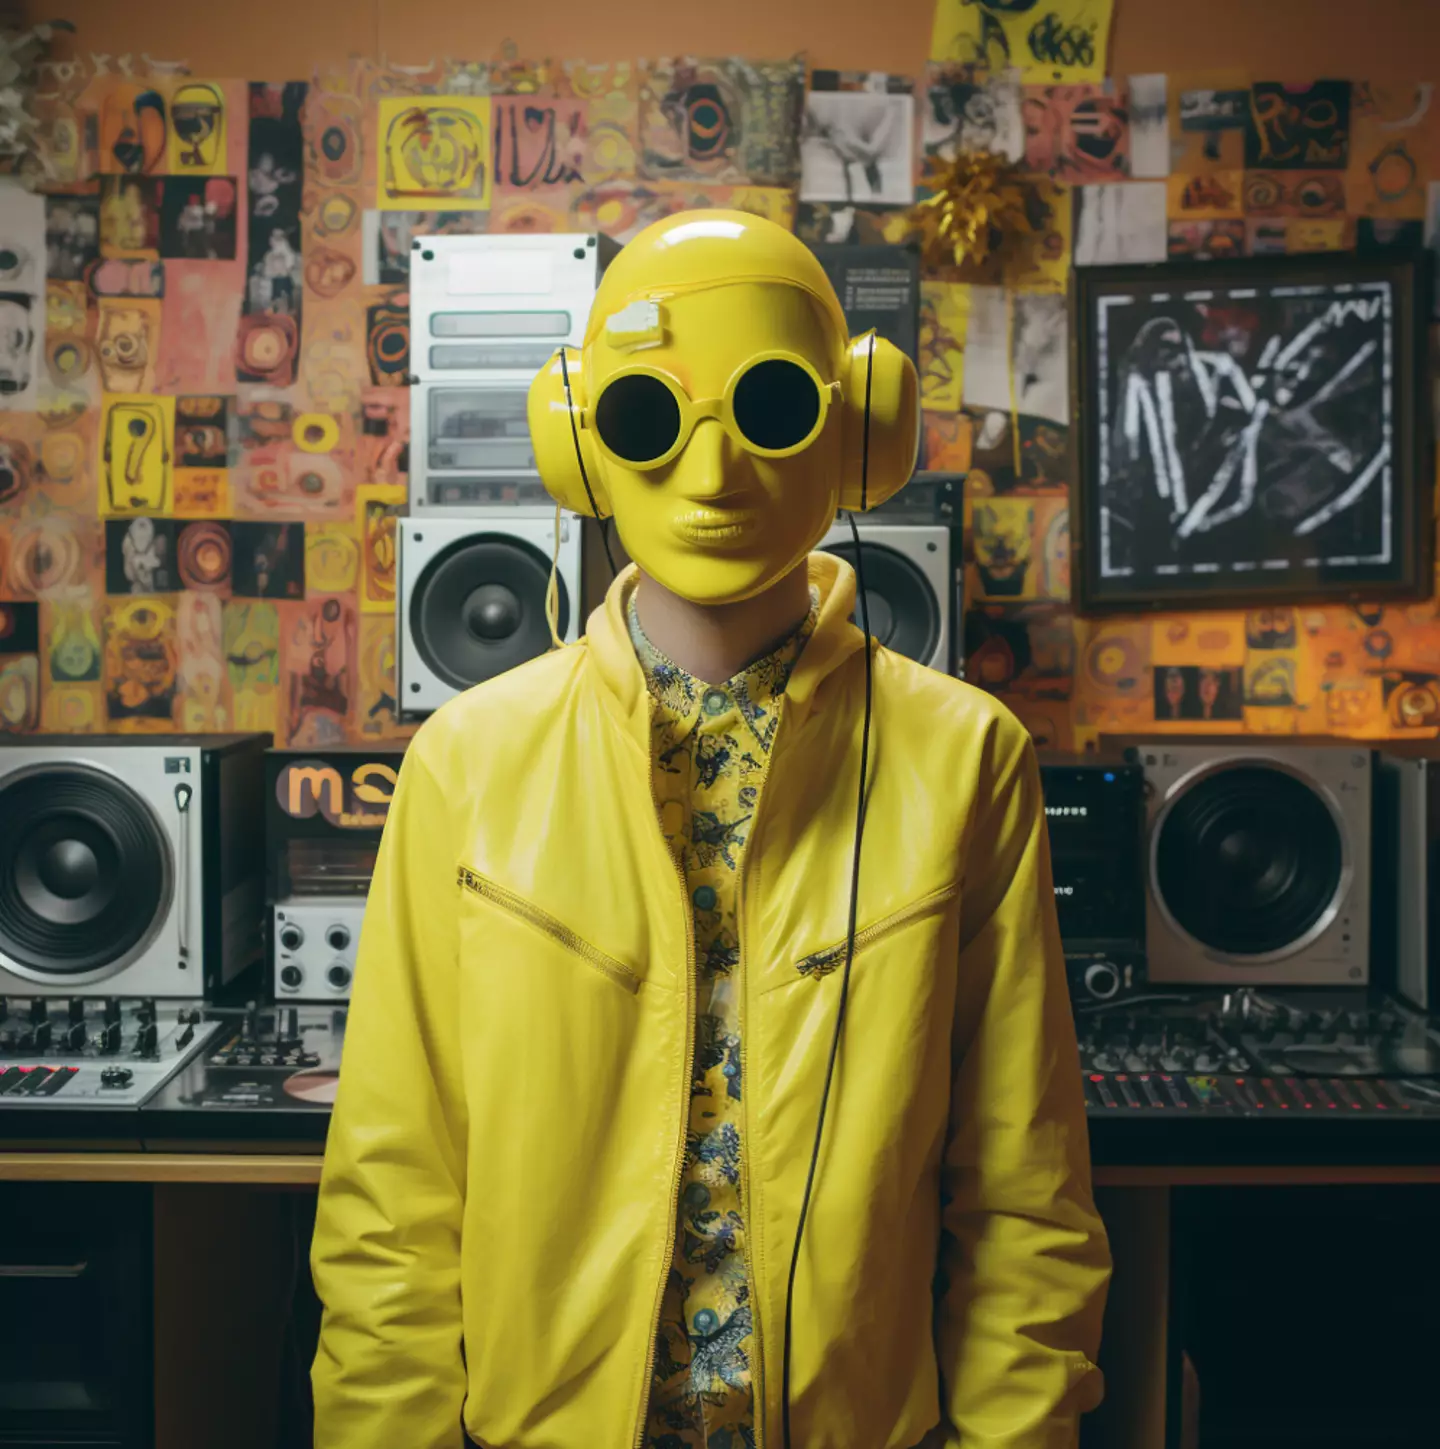 This is what an AI thinks an average Acid House fan looks like. Who are we to argue?